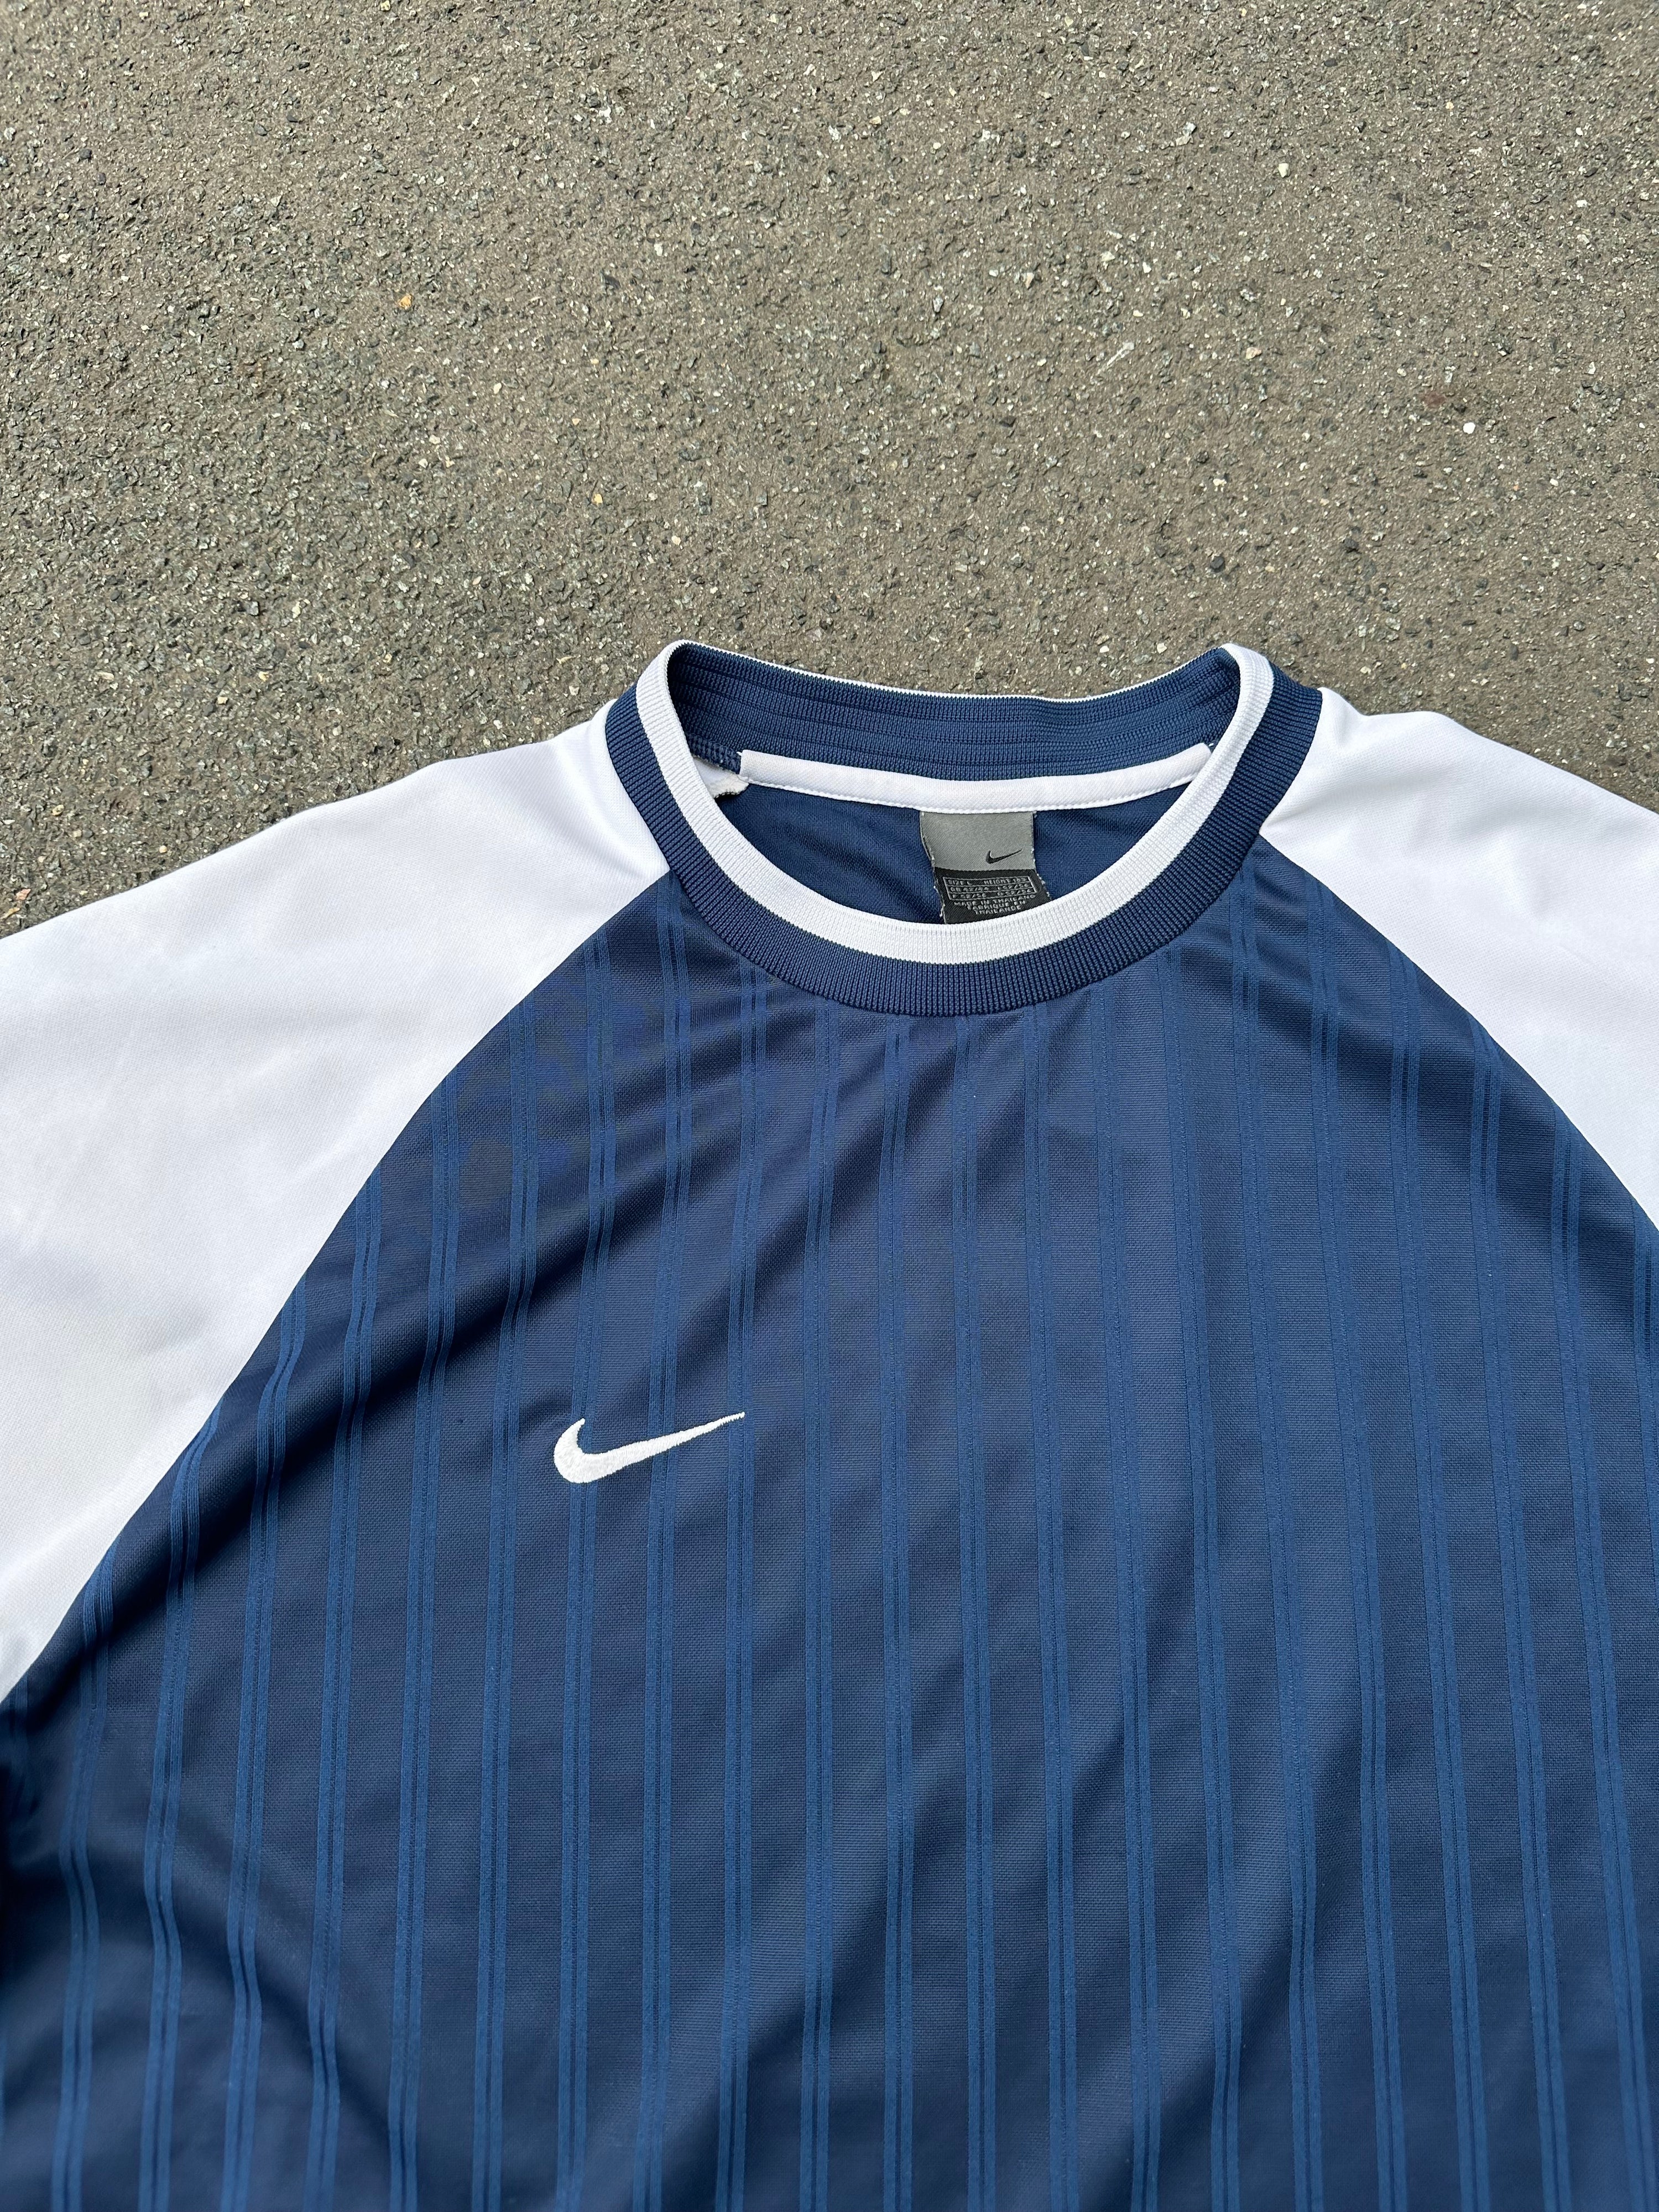 Early 2000s Nike Jersey (L)